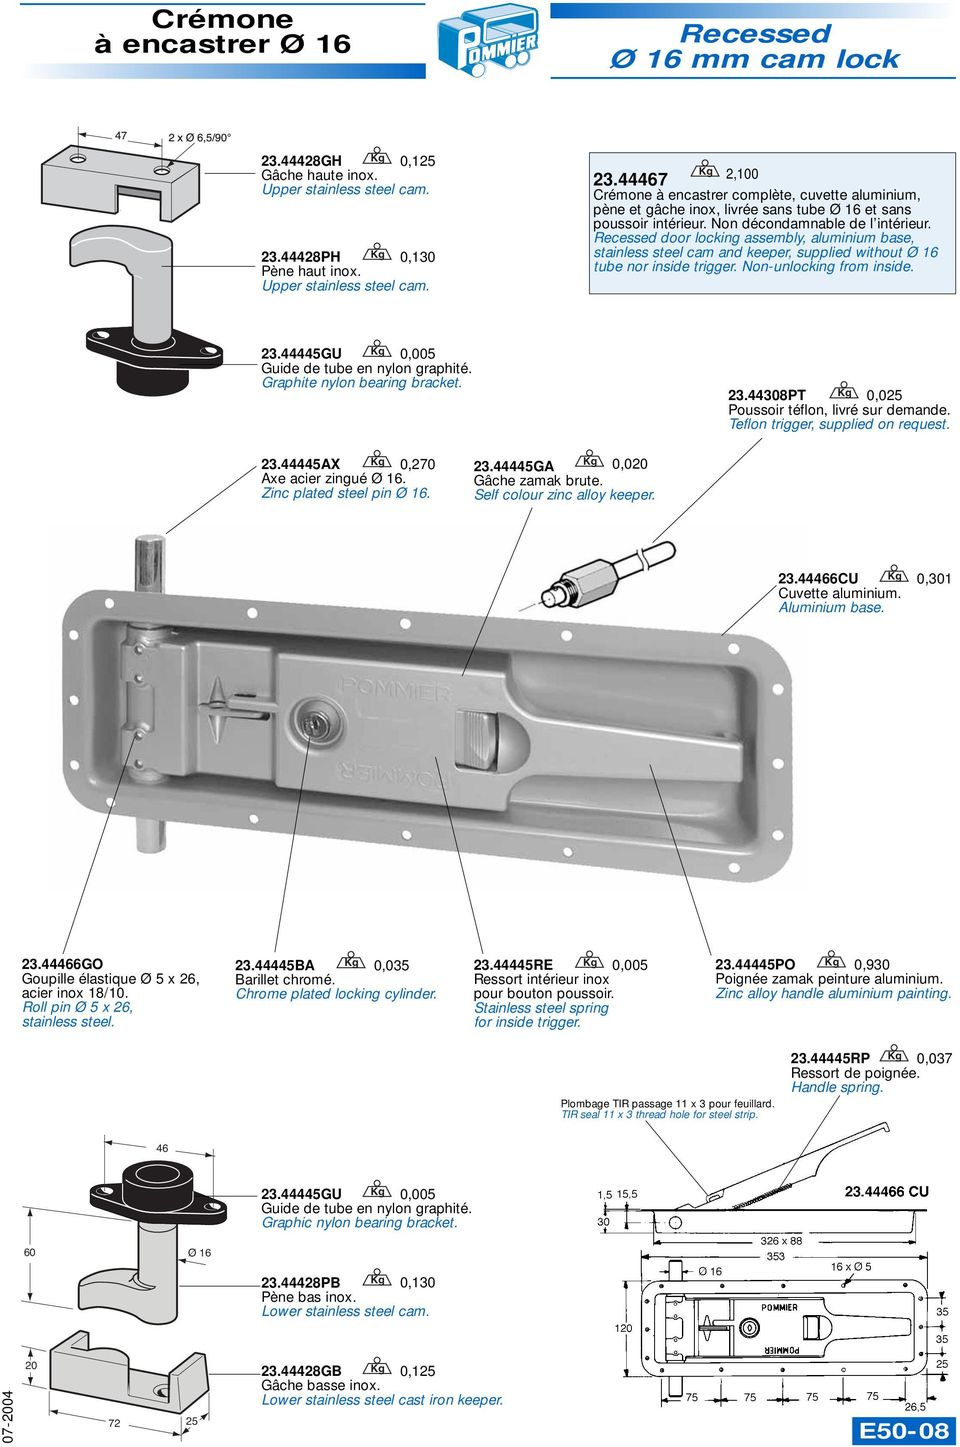 Recessed door locking assembly, aluminium base, stainless steel cam and keeper, supplied without Ø 16 tube nor inside trigger. Non-unlocking from inside. 23.